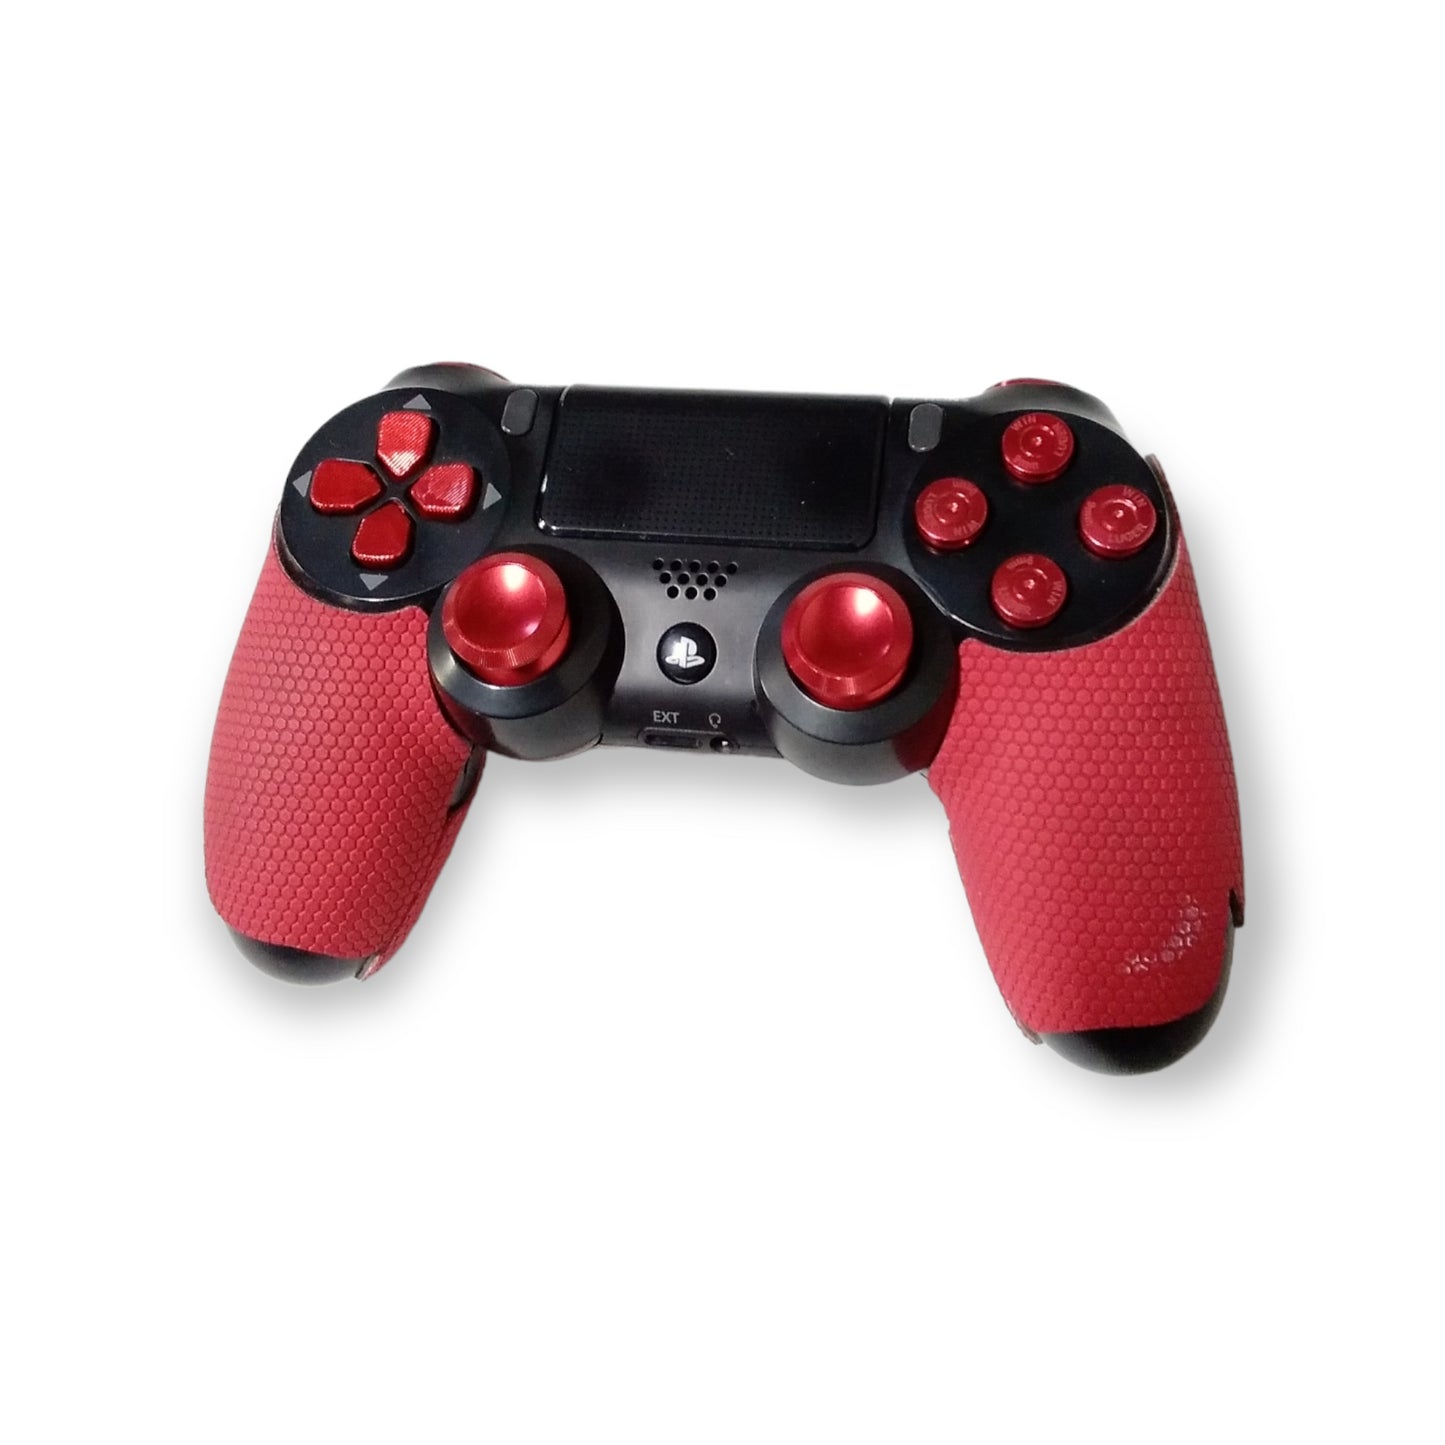 Modified PlayStation 4 Controller - Black/Red